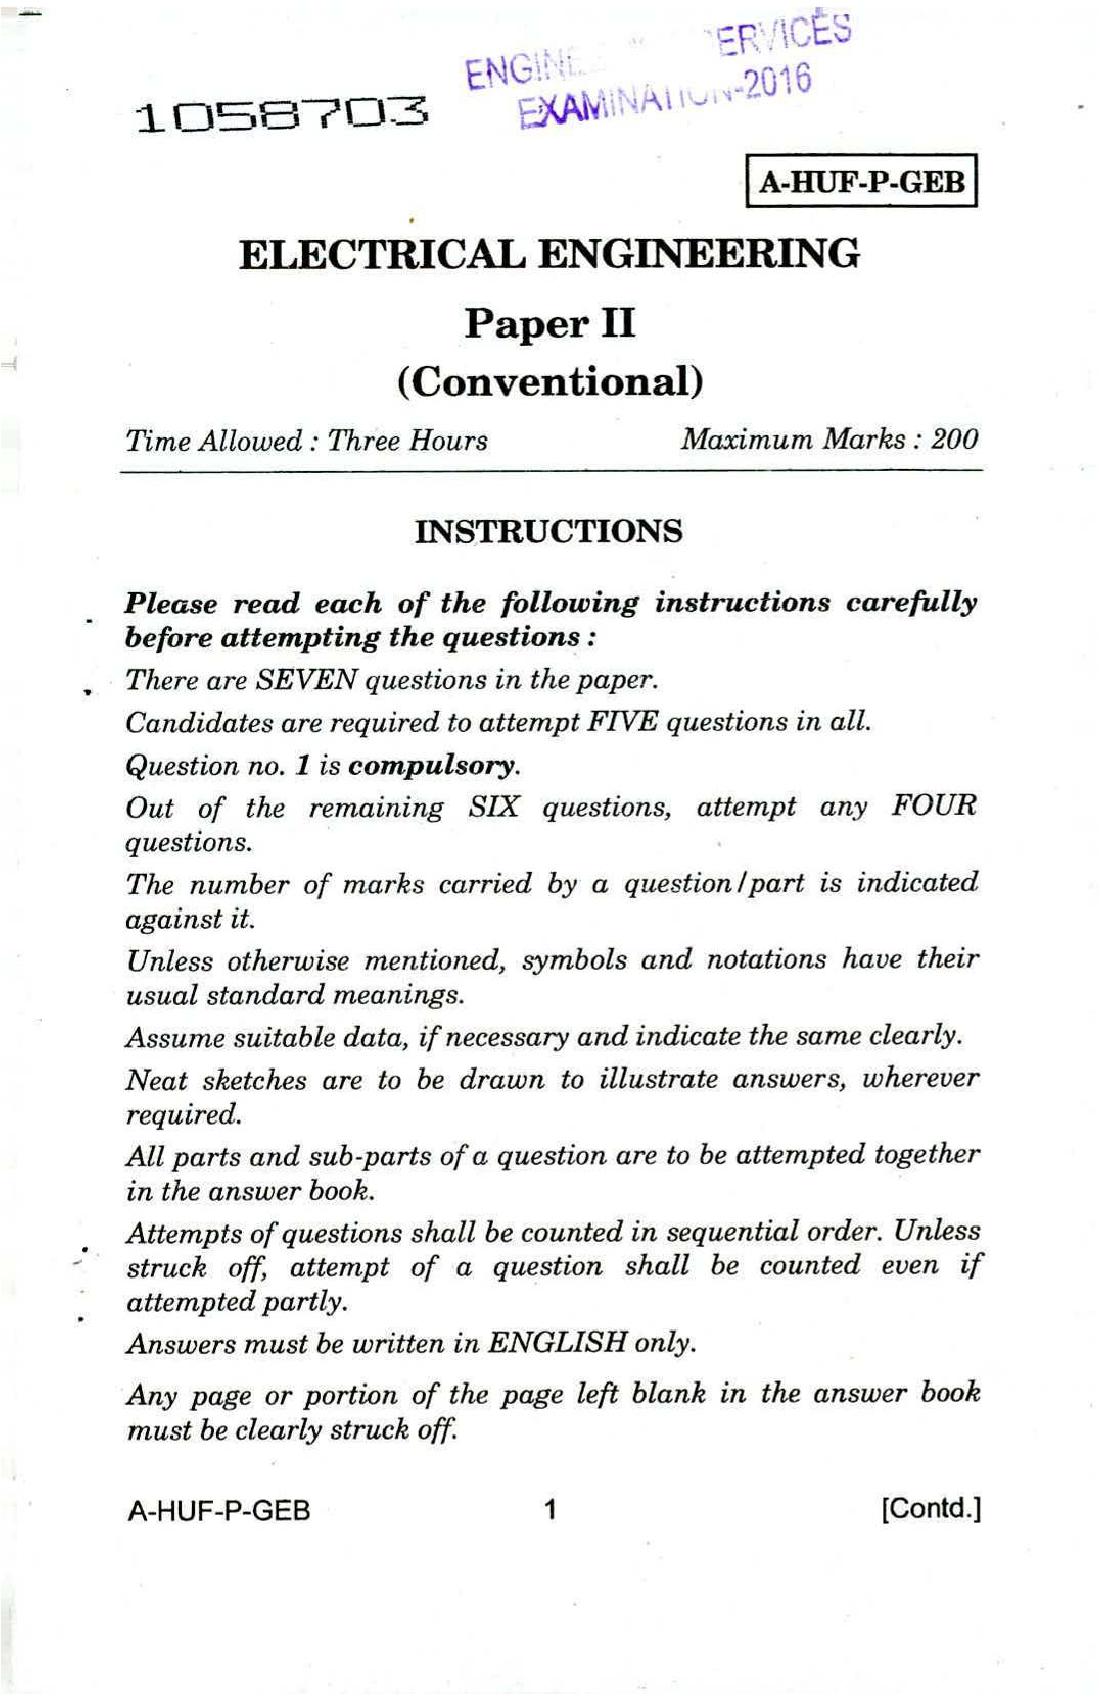 UPSC IES 2016 (Mains) Question Paper Electrical Engineering Paper II - Page 1